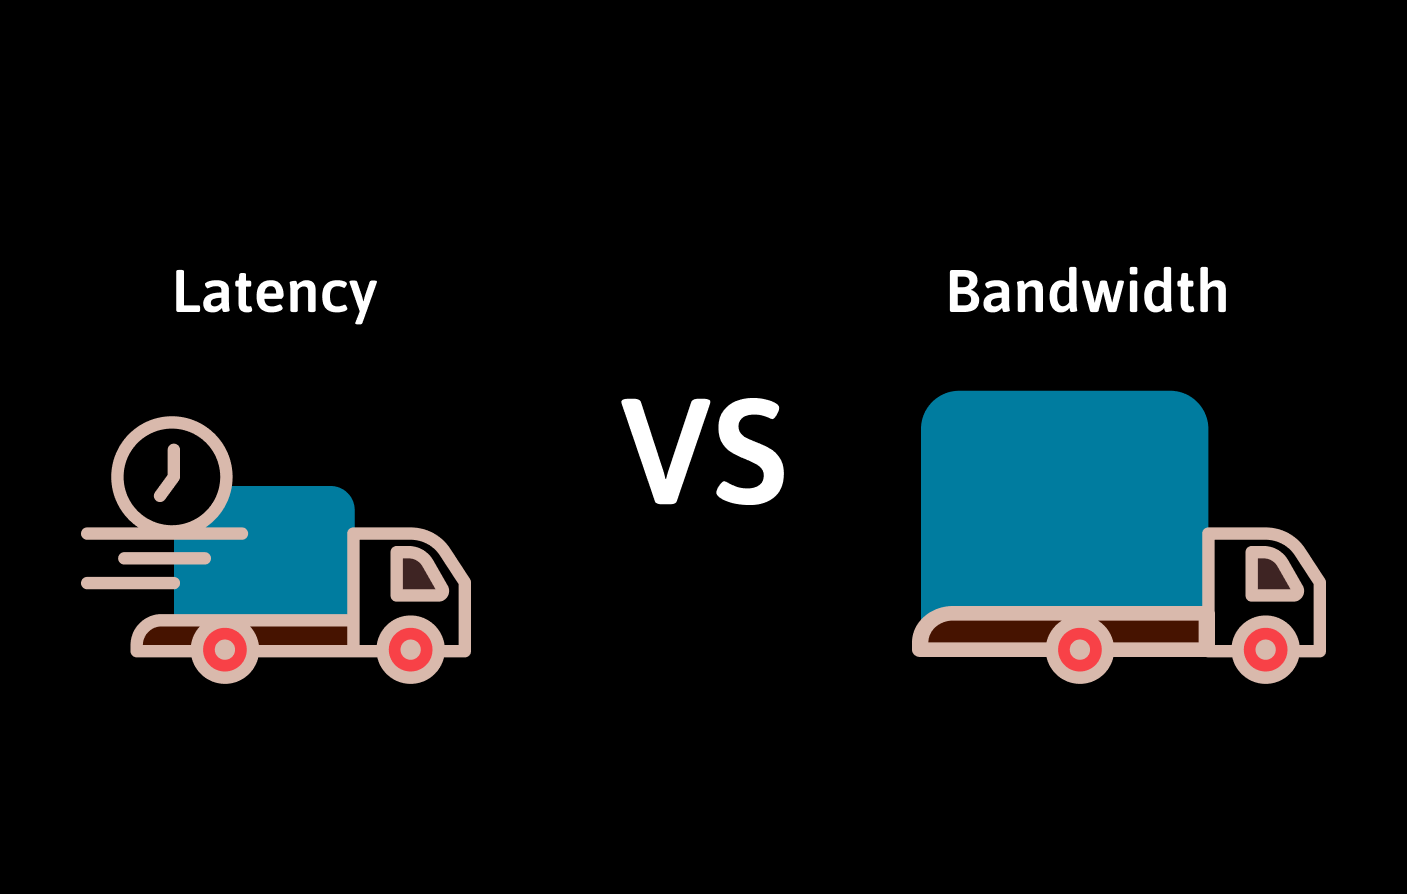 What is the difference between Bandwidth vs Latency?